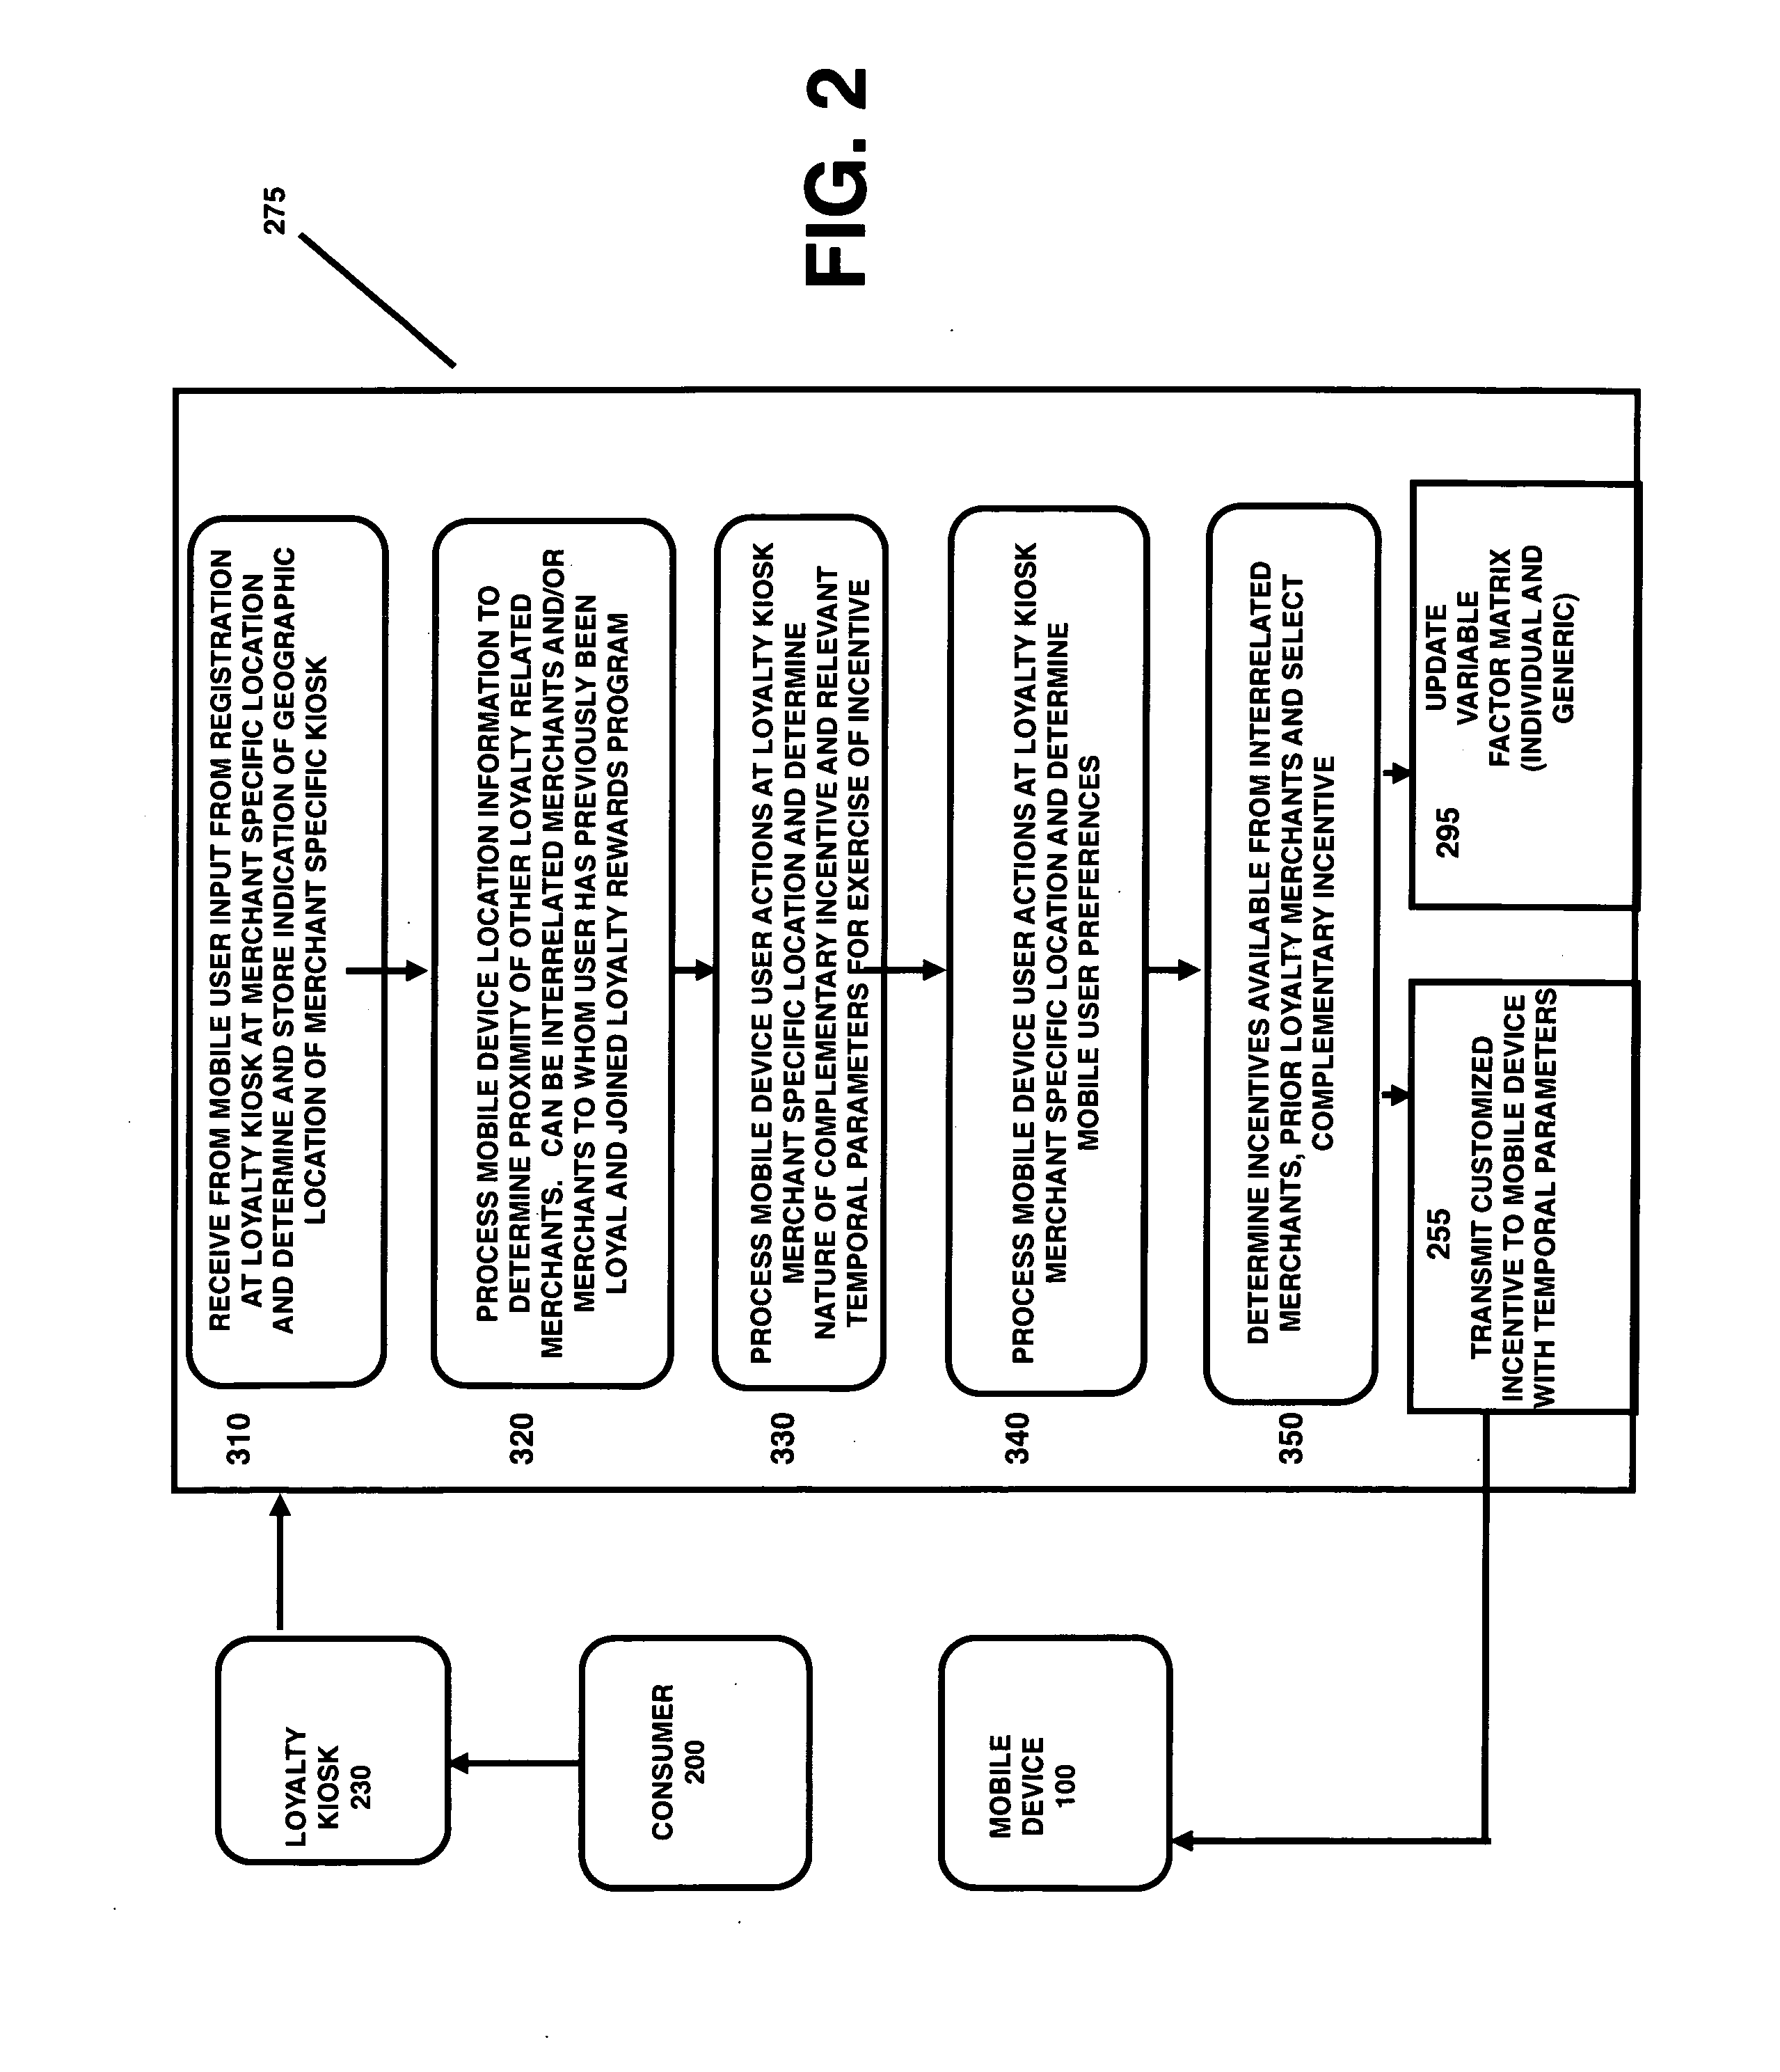 Geofencing system for obtaining personal location and preference data and automatic distribution of consumer specific data, benefits and incentives based on variable factor matrix determinations